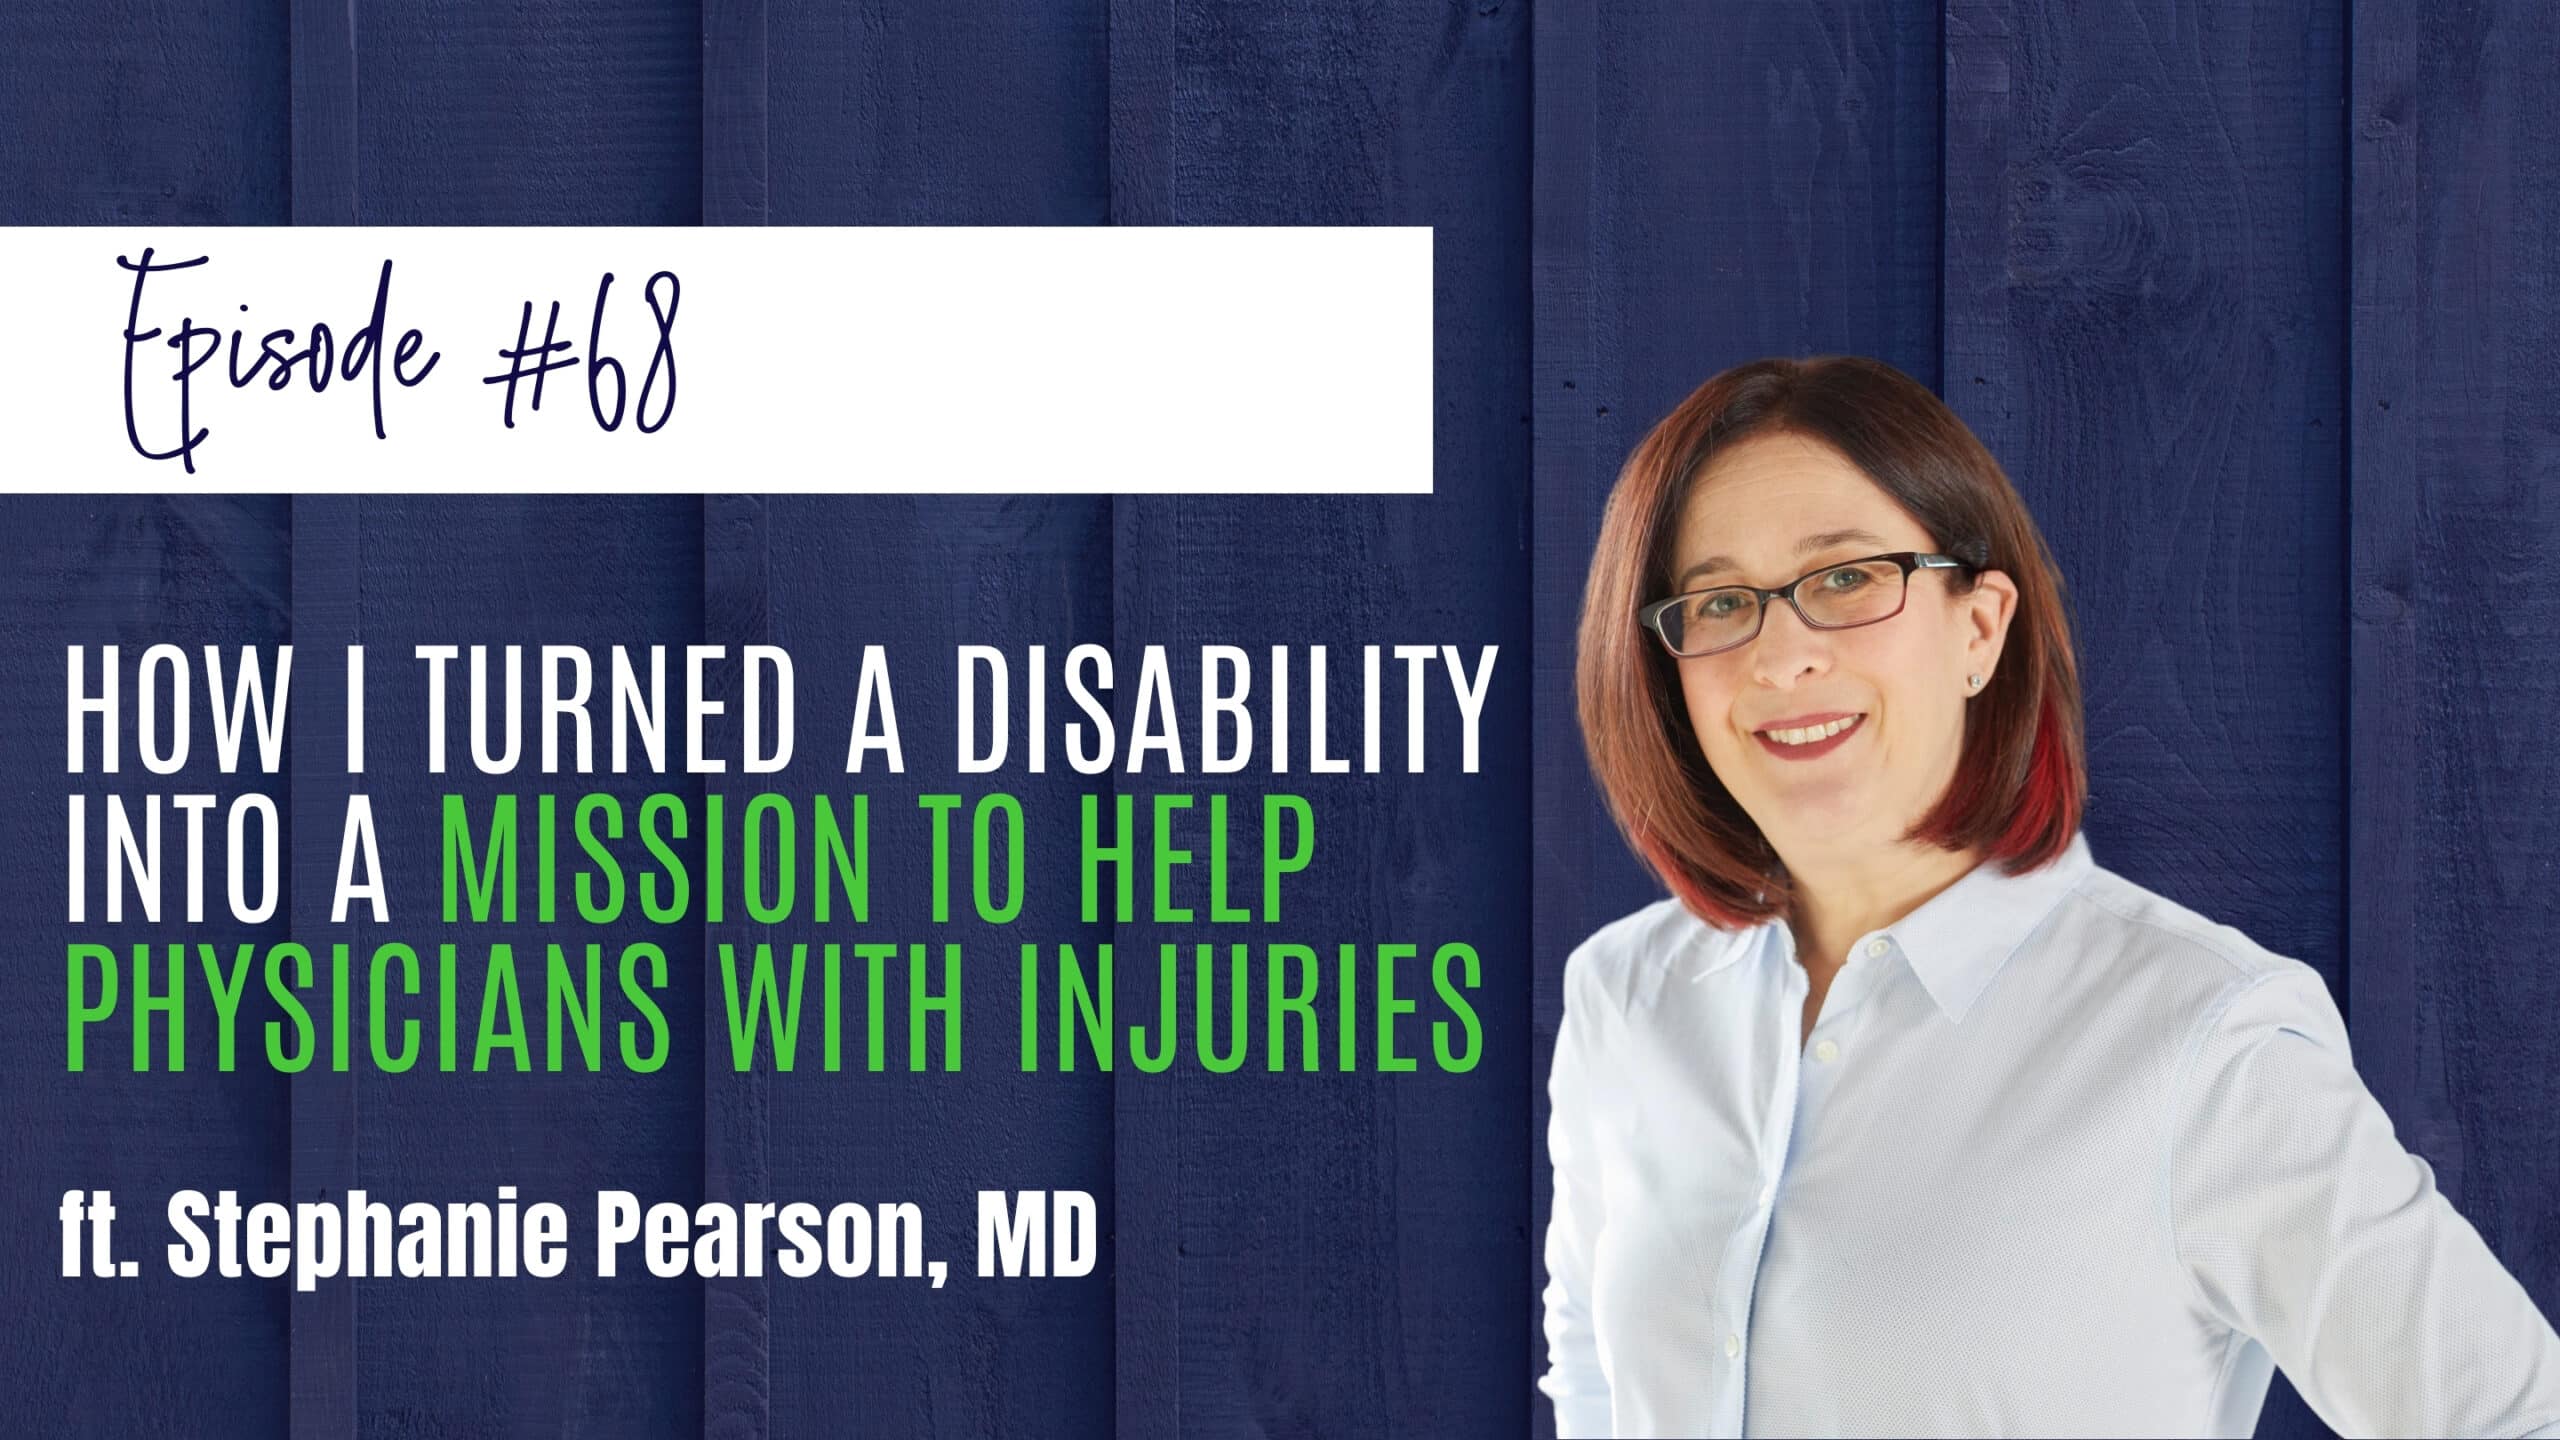 How I Turned a Disability Into a Mission To Help Physicians With Injuries